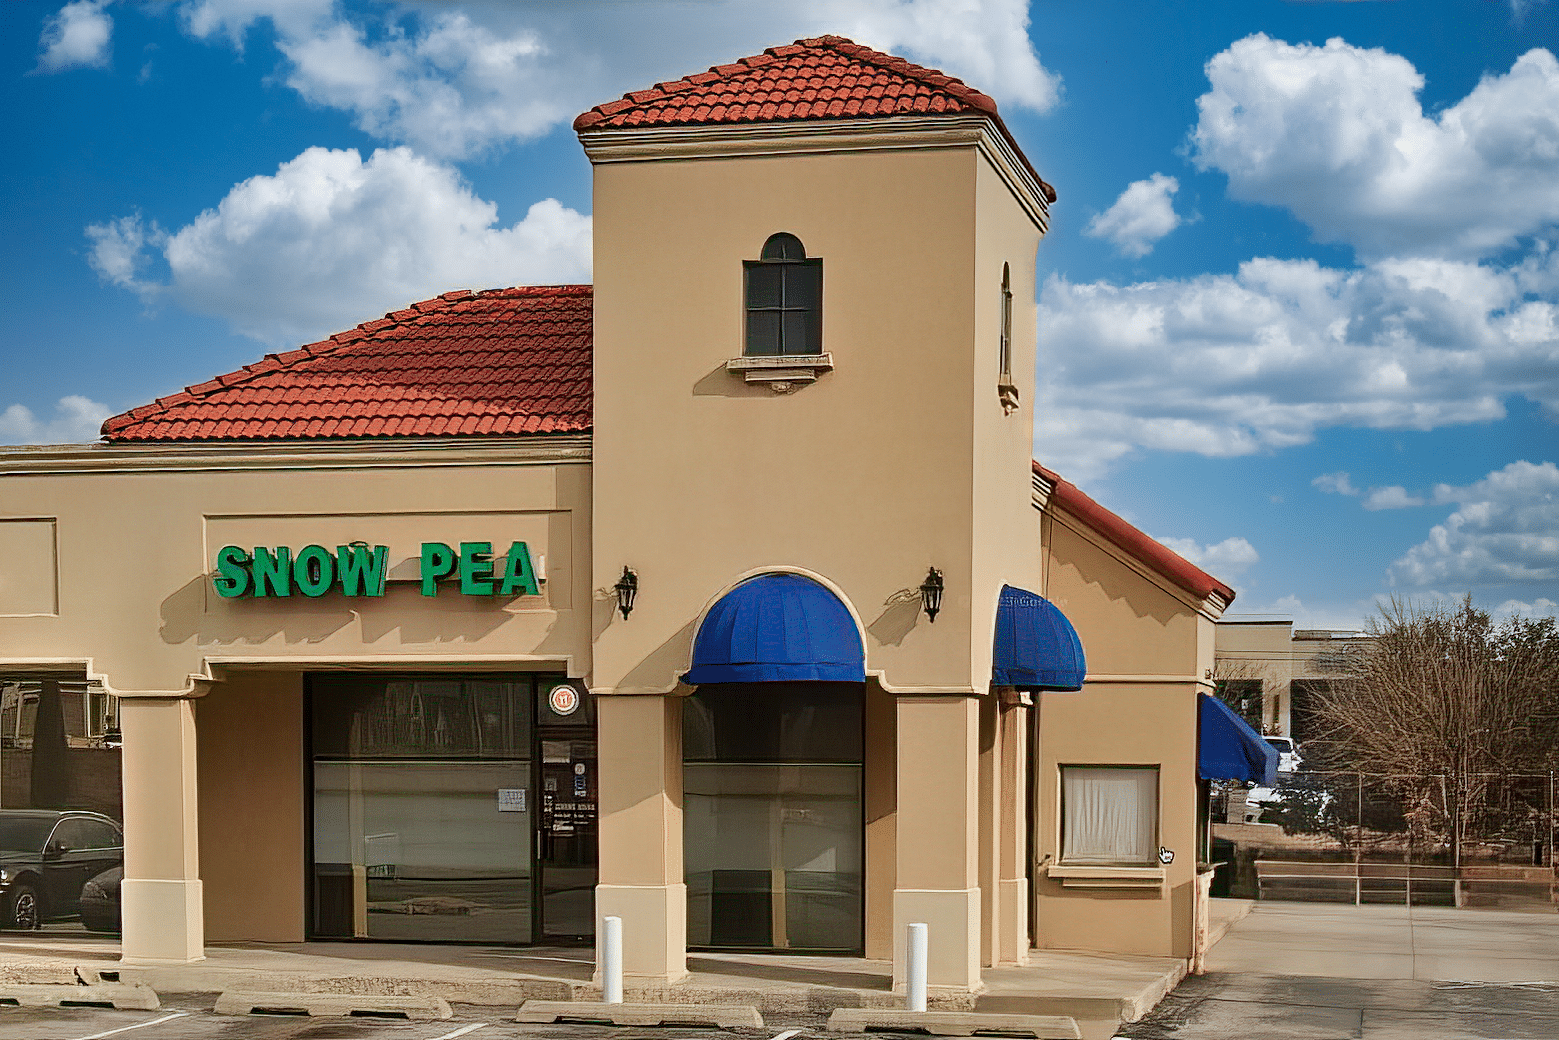 The Snow Pea Restaurant building with a blue awning.